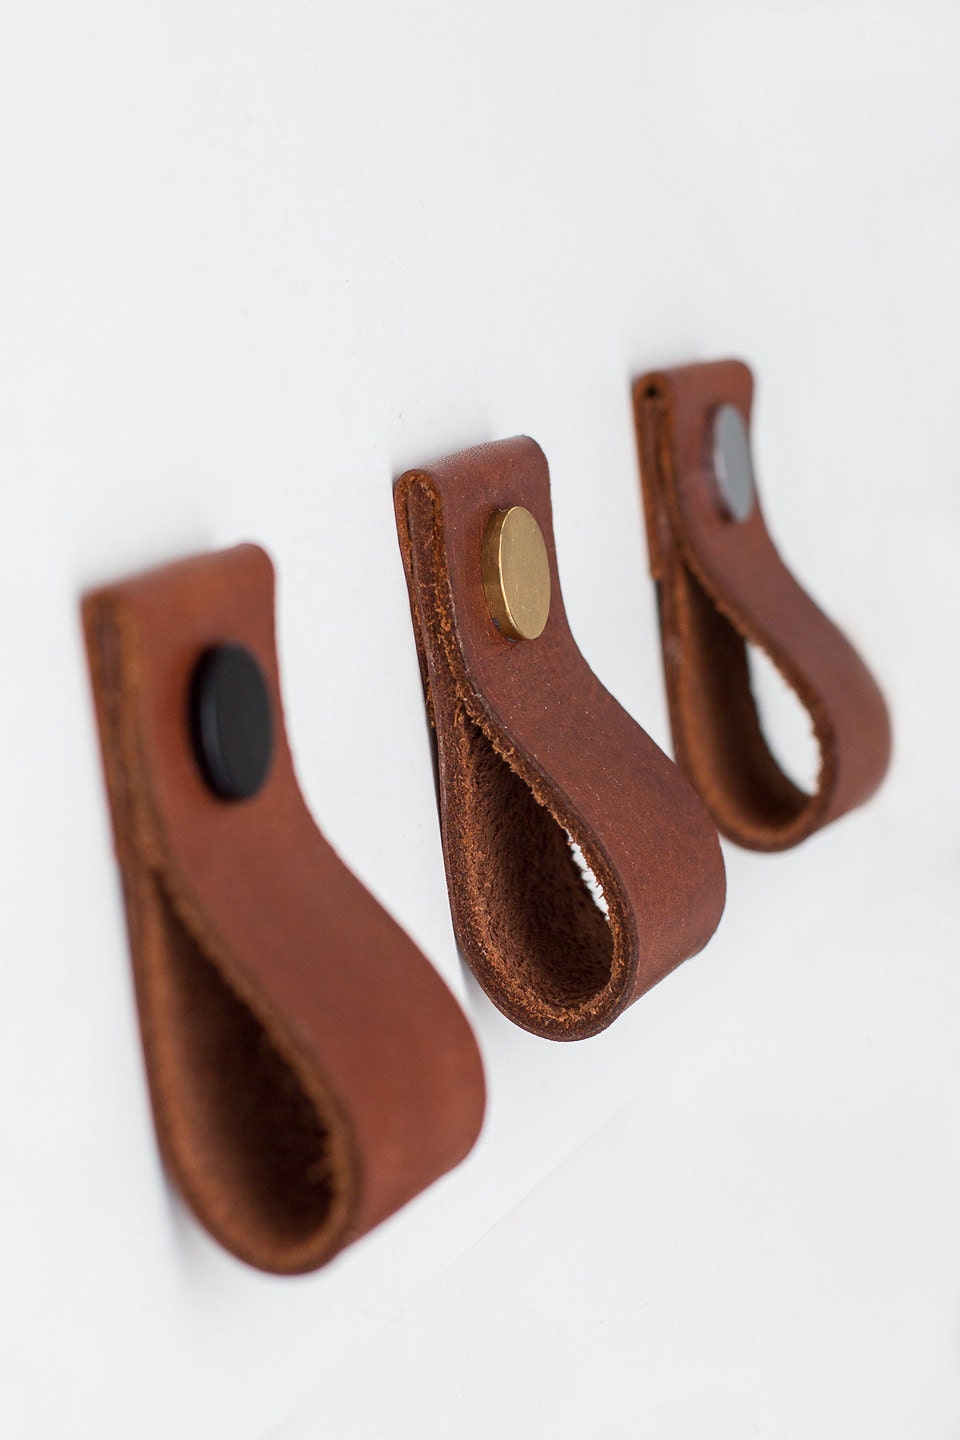 Leather Pulls / Leather Handles / Leather Cabinet Hardware